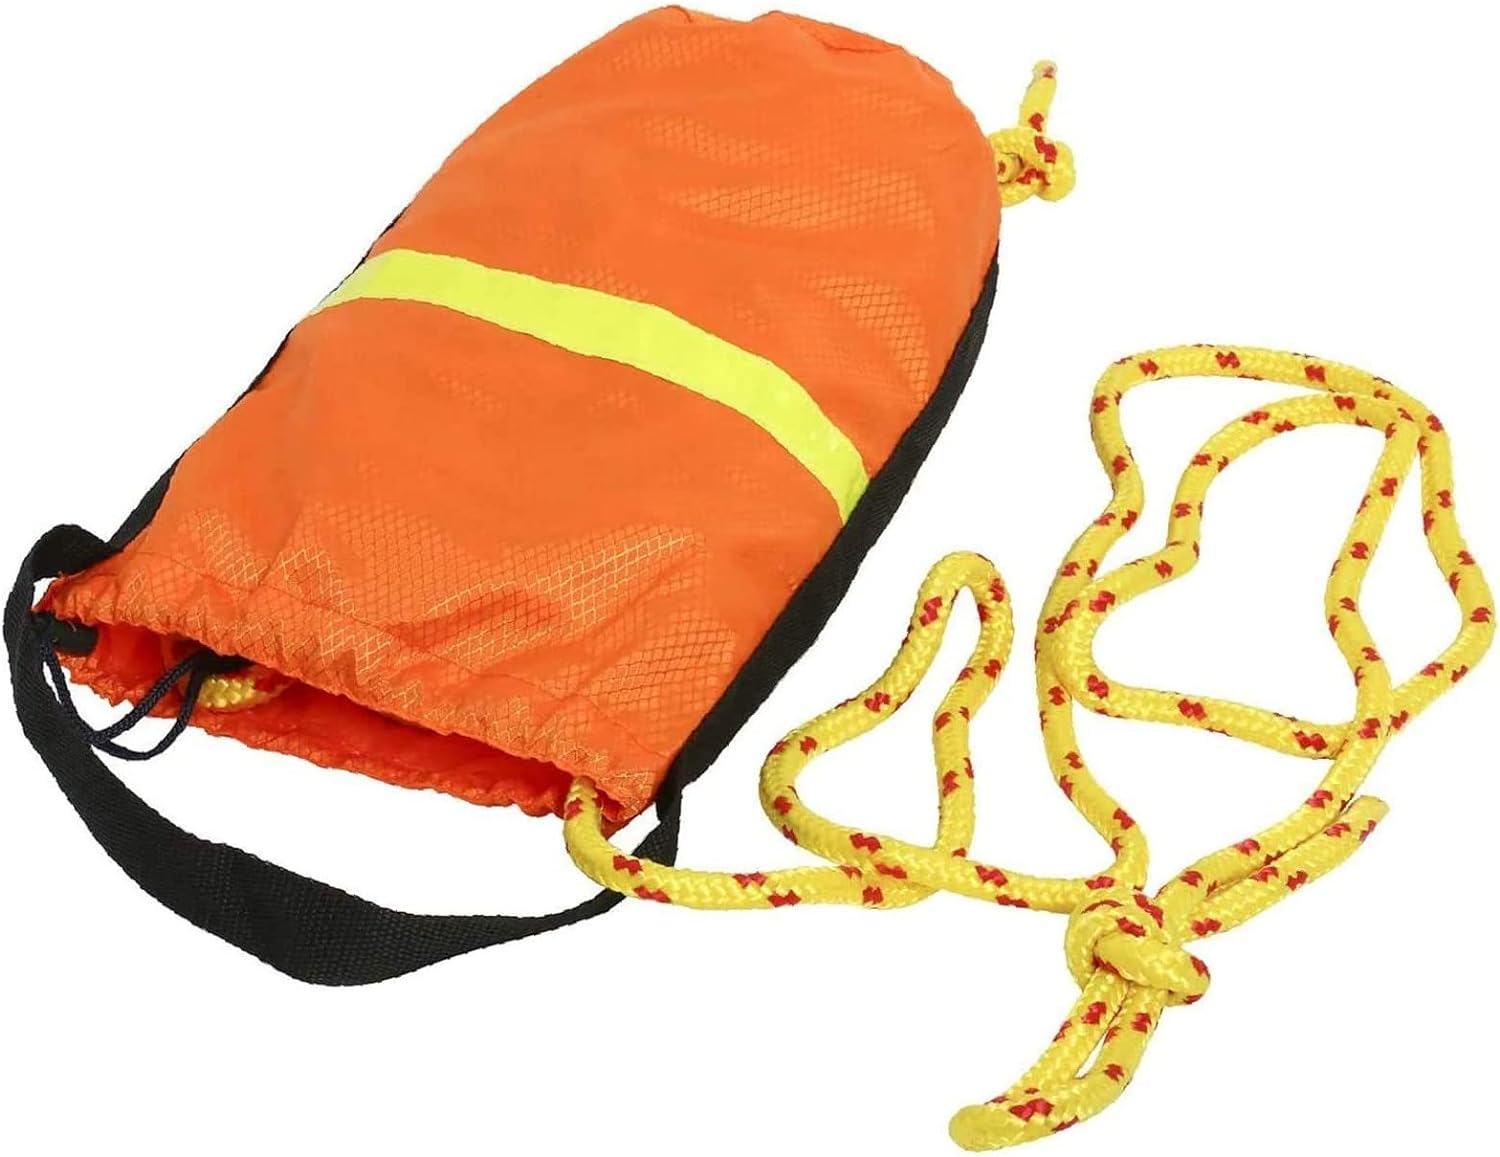 Dragonus Throw Bag Rescue Rope High Visibility Water Rescue Safety Equipment Kayak and Boat Emergency Equipment, Size: 30m, Yellow